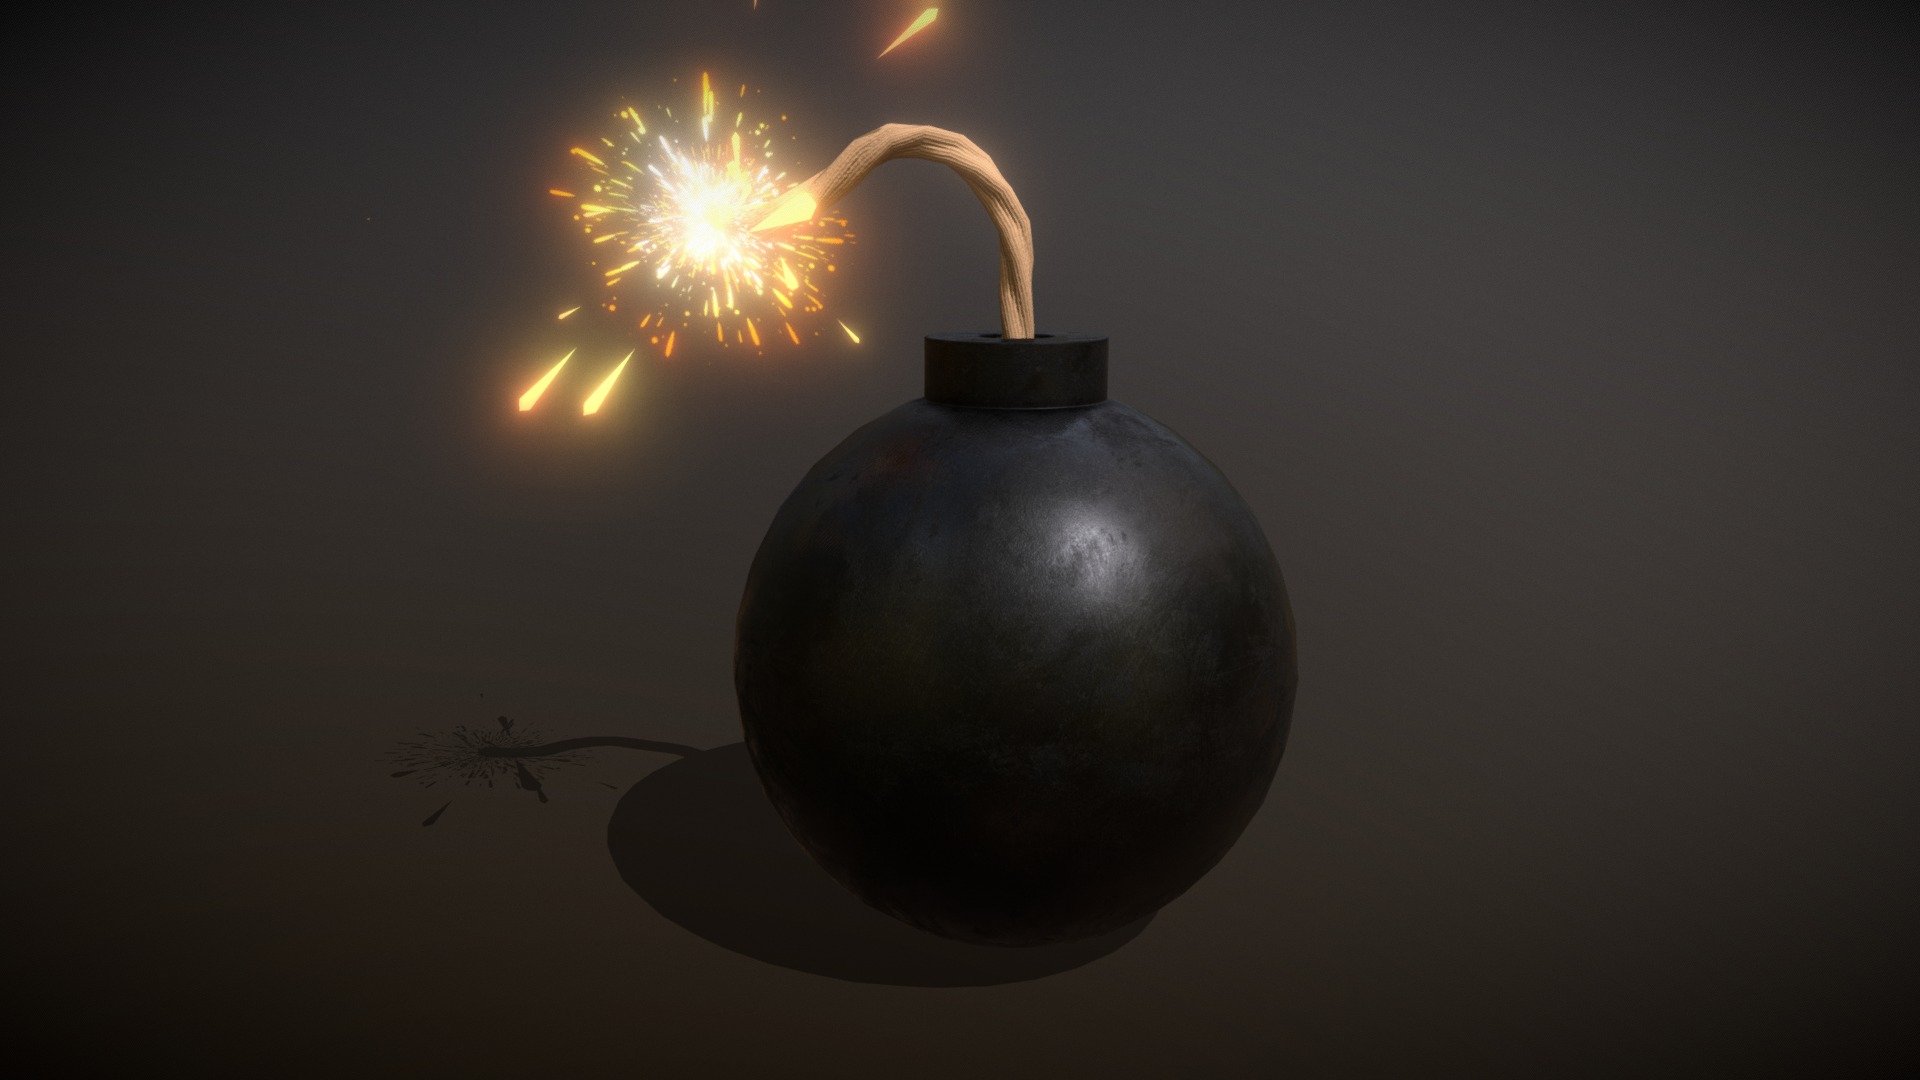 💣💥

Contains the Blender project file in the additional file!

Use it carefully

Made with blender and substance painter 



If you have any questions, contact me.

 
 - Animated Bomb 💣💥 - Buy Royalty Free 3D model by Zacxophone 3d model